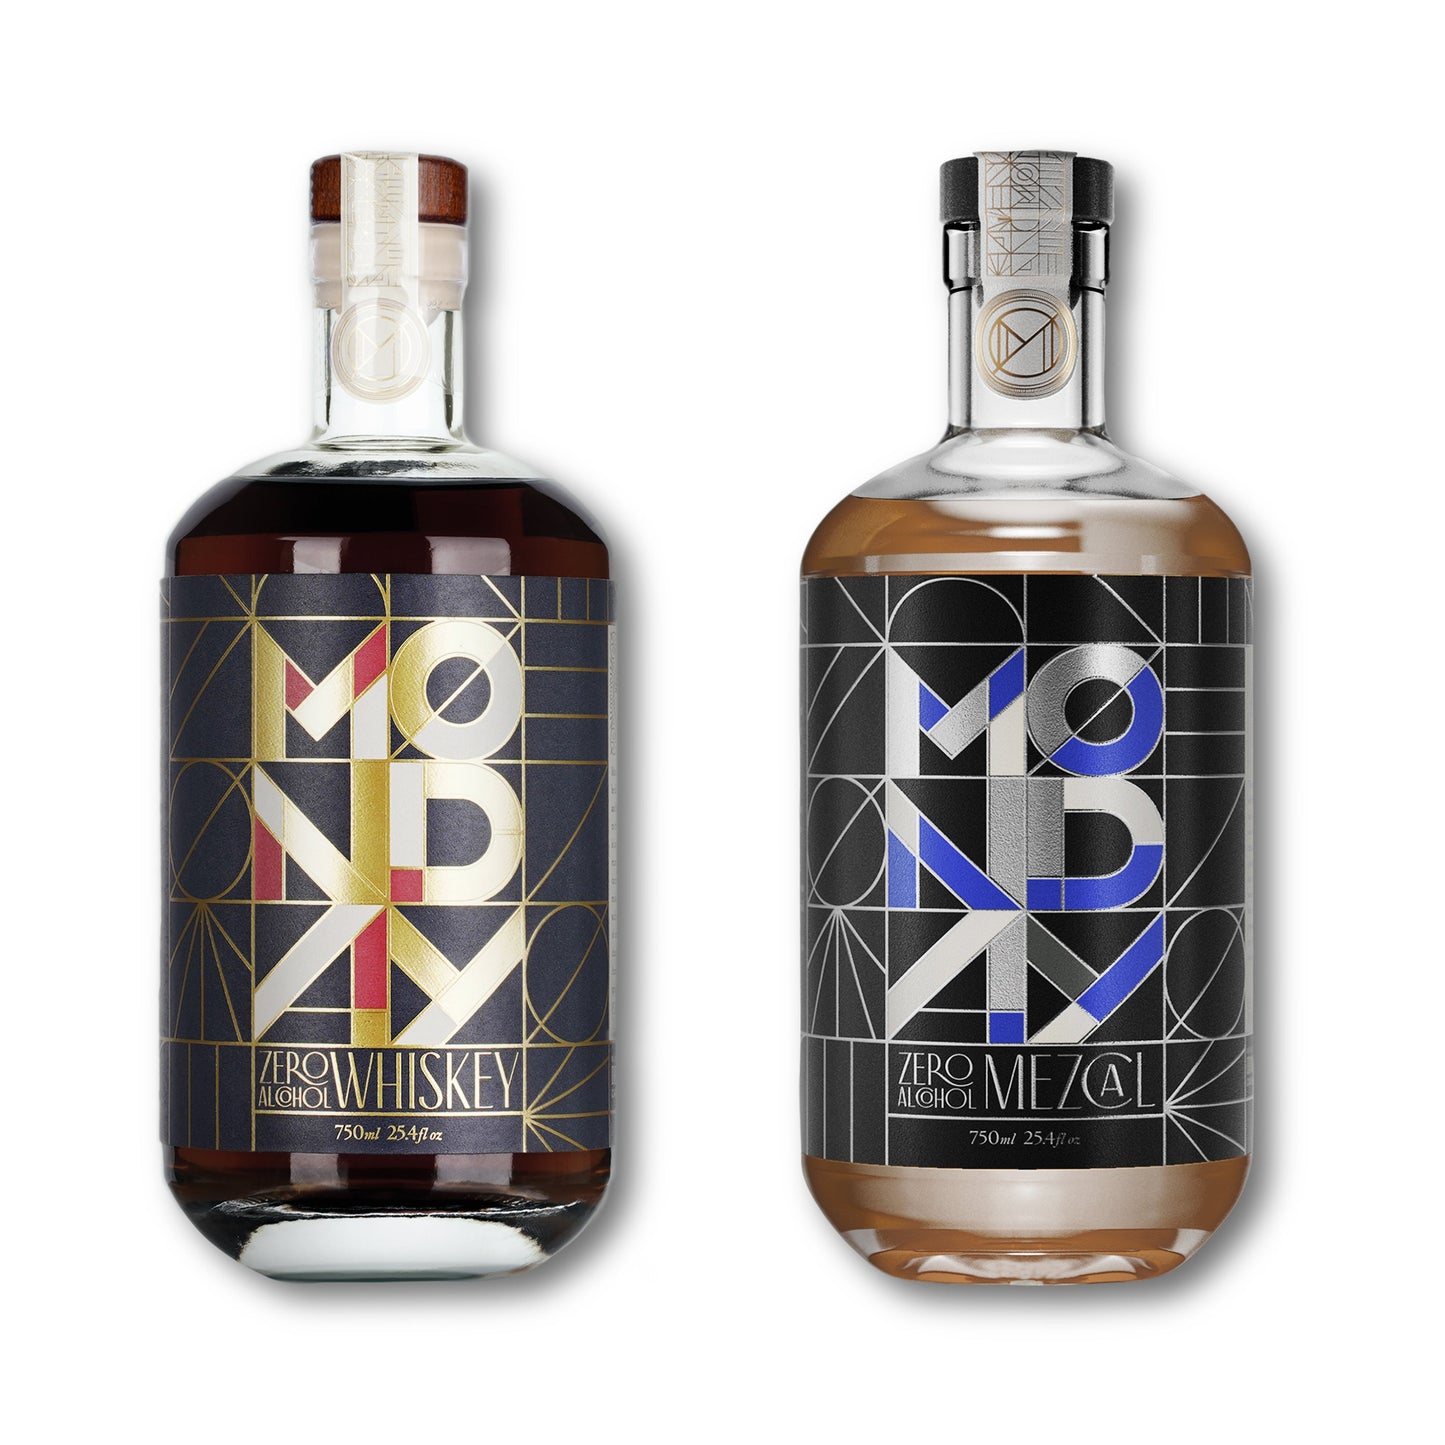 Drink Monday - Whiskey & Mezcal Duo - 750ml each